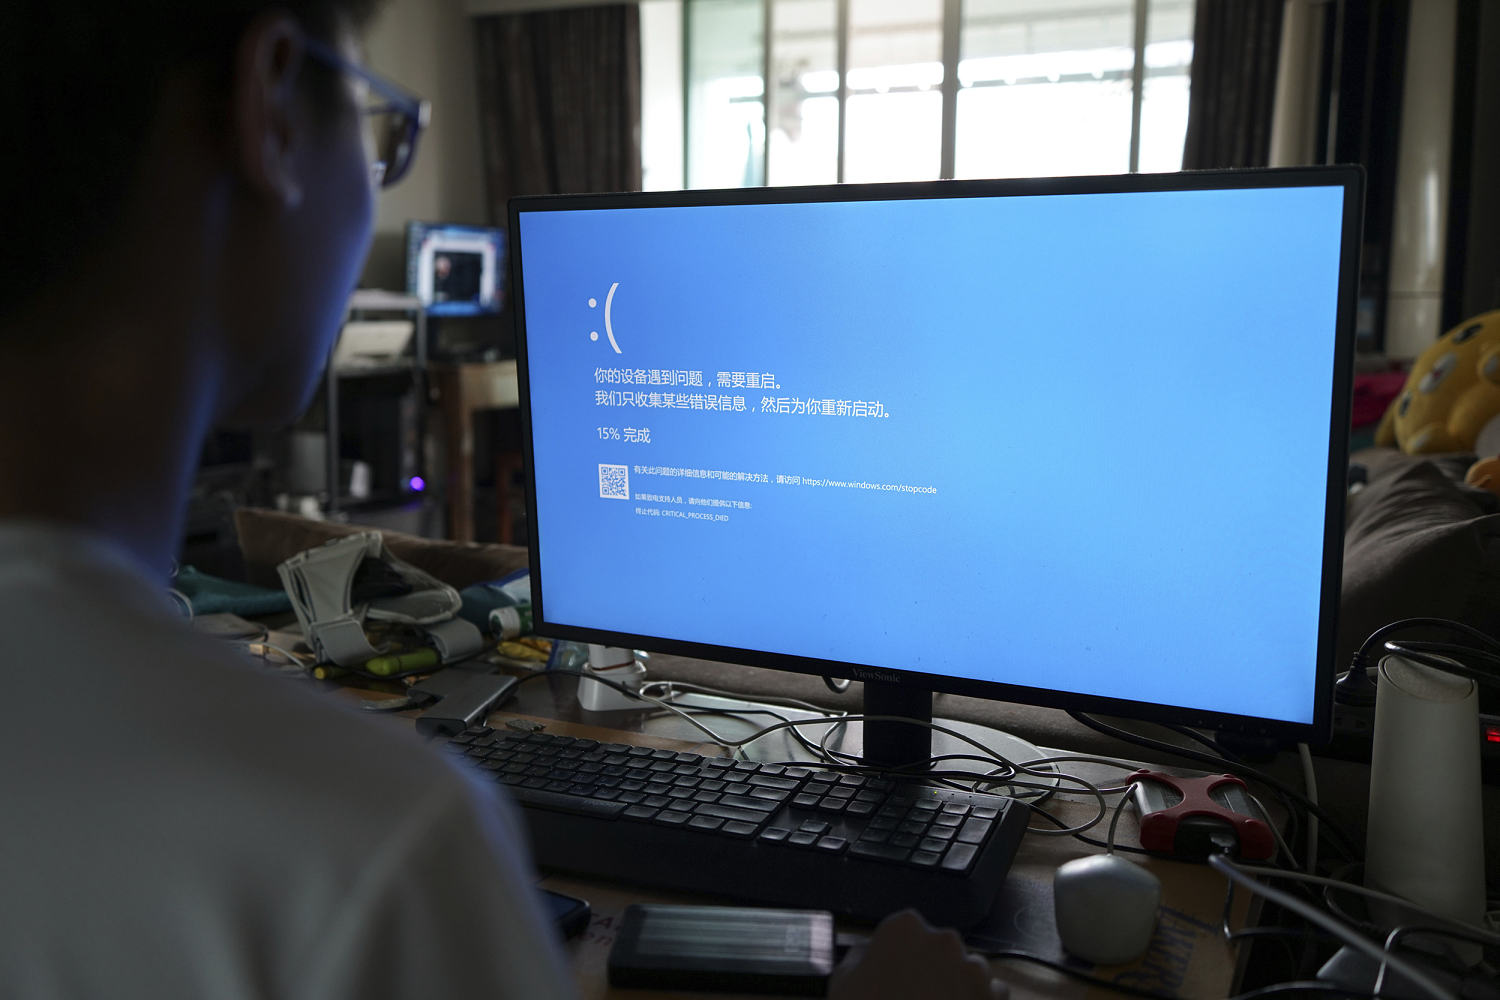 Microsoft's ‘Blue Screen of Death’ makes a return to computers around the world